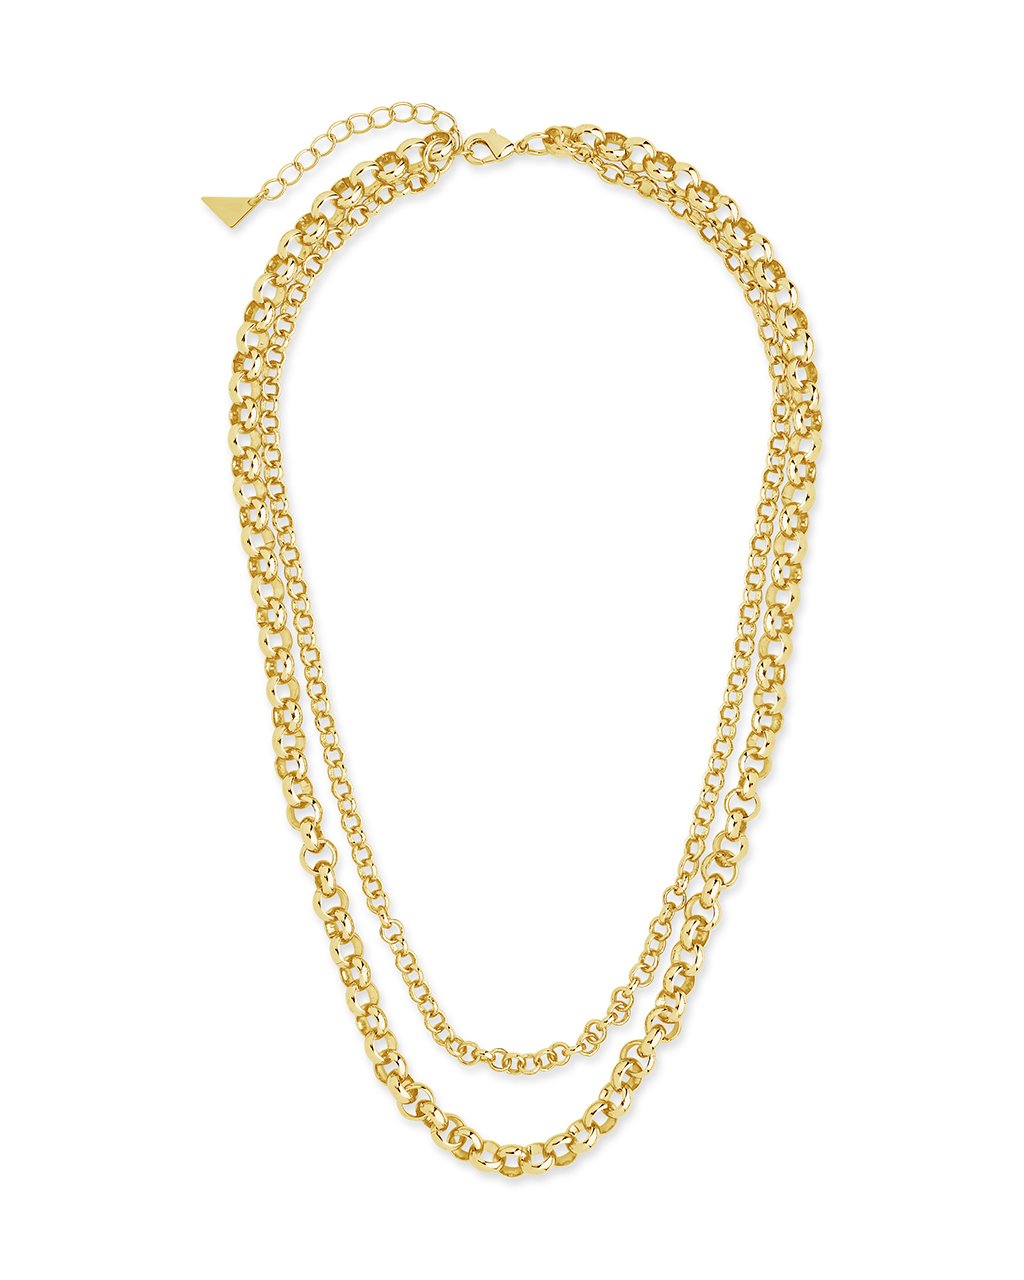 Bold Layered Rolo Chain Necklace by Sterling Forever